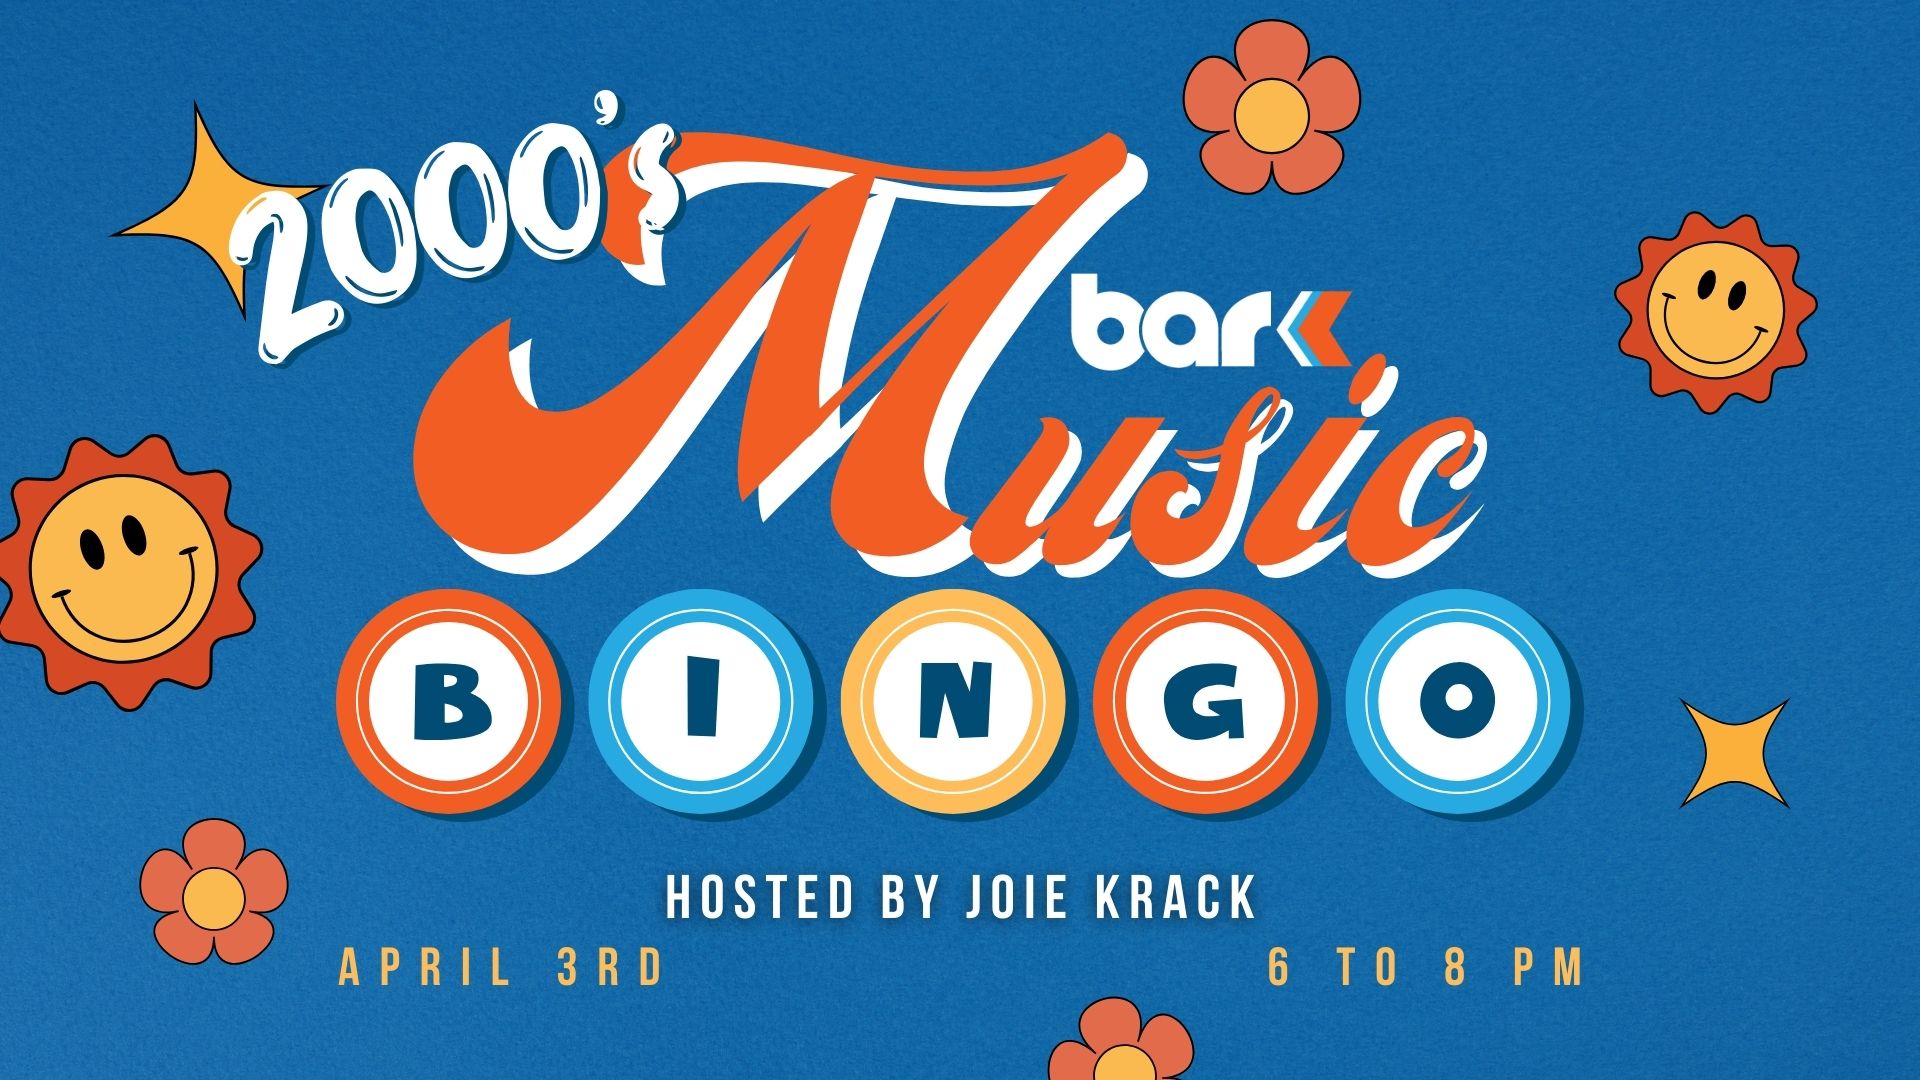 Bar K 2000's music bingo. Hosted by Joie Krack. April 3rd from 6 to 8 pm.